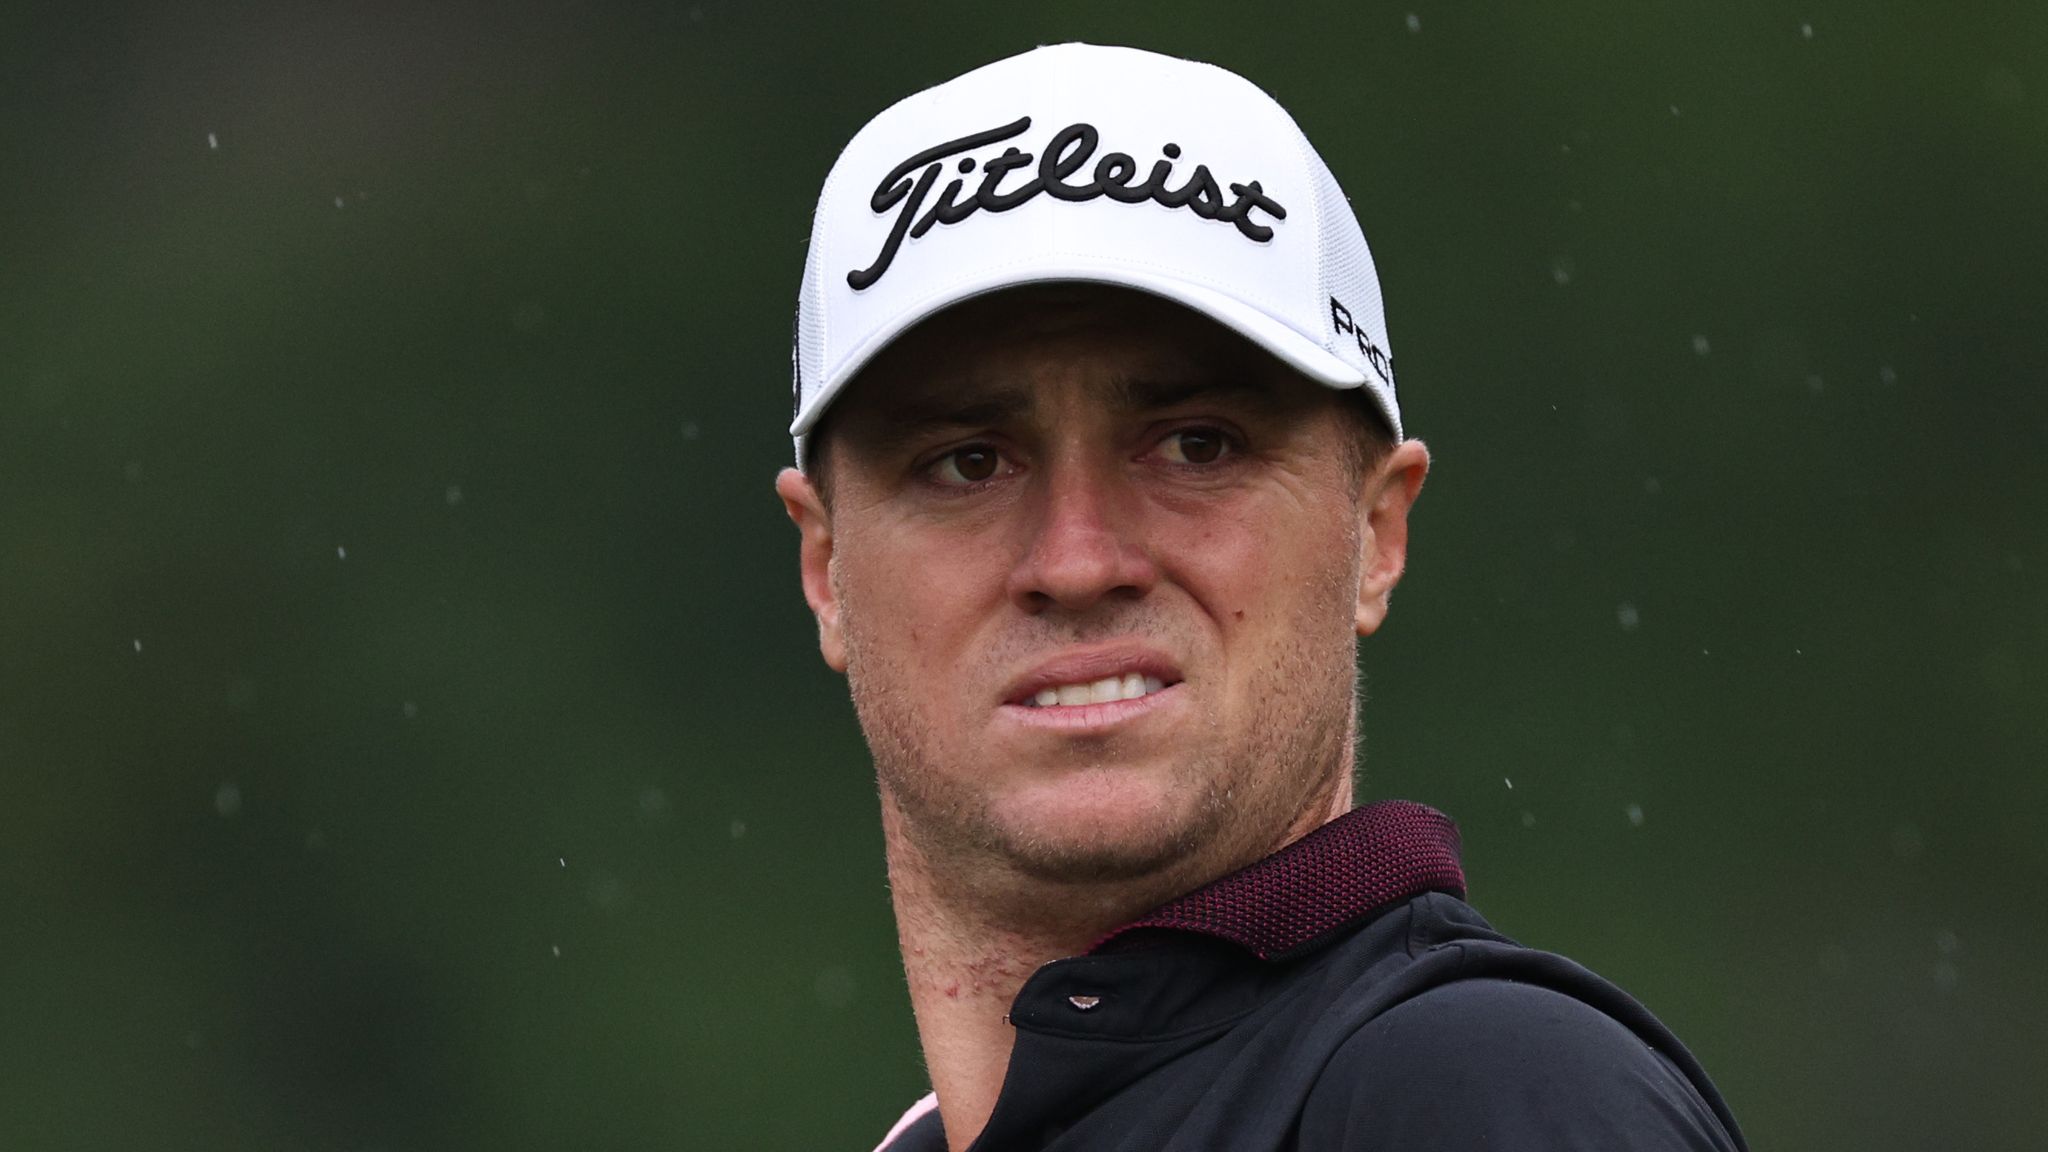 Wyndham Championship Justin Thomas in danger of missing cut in final push for FedExCup play-off spot Golf News Sky Sports